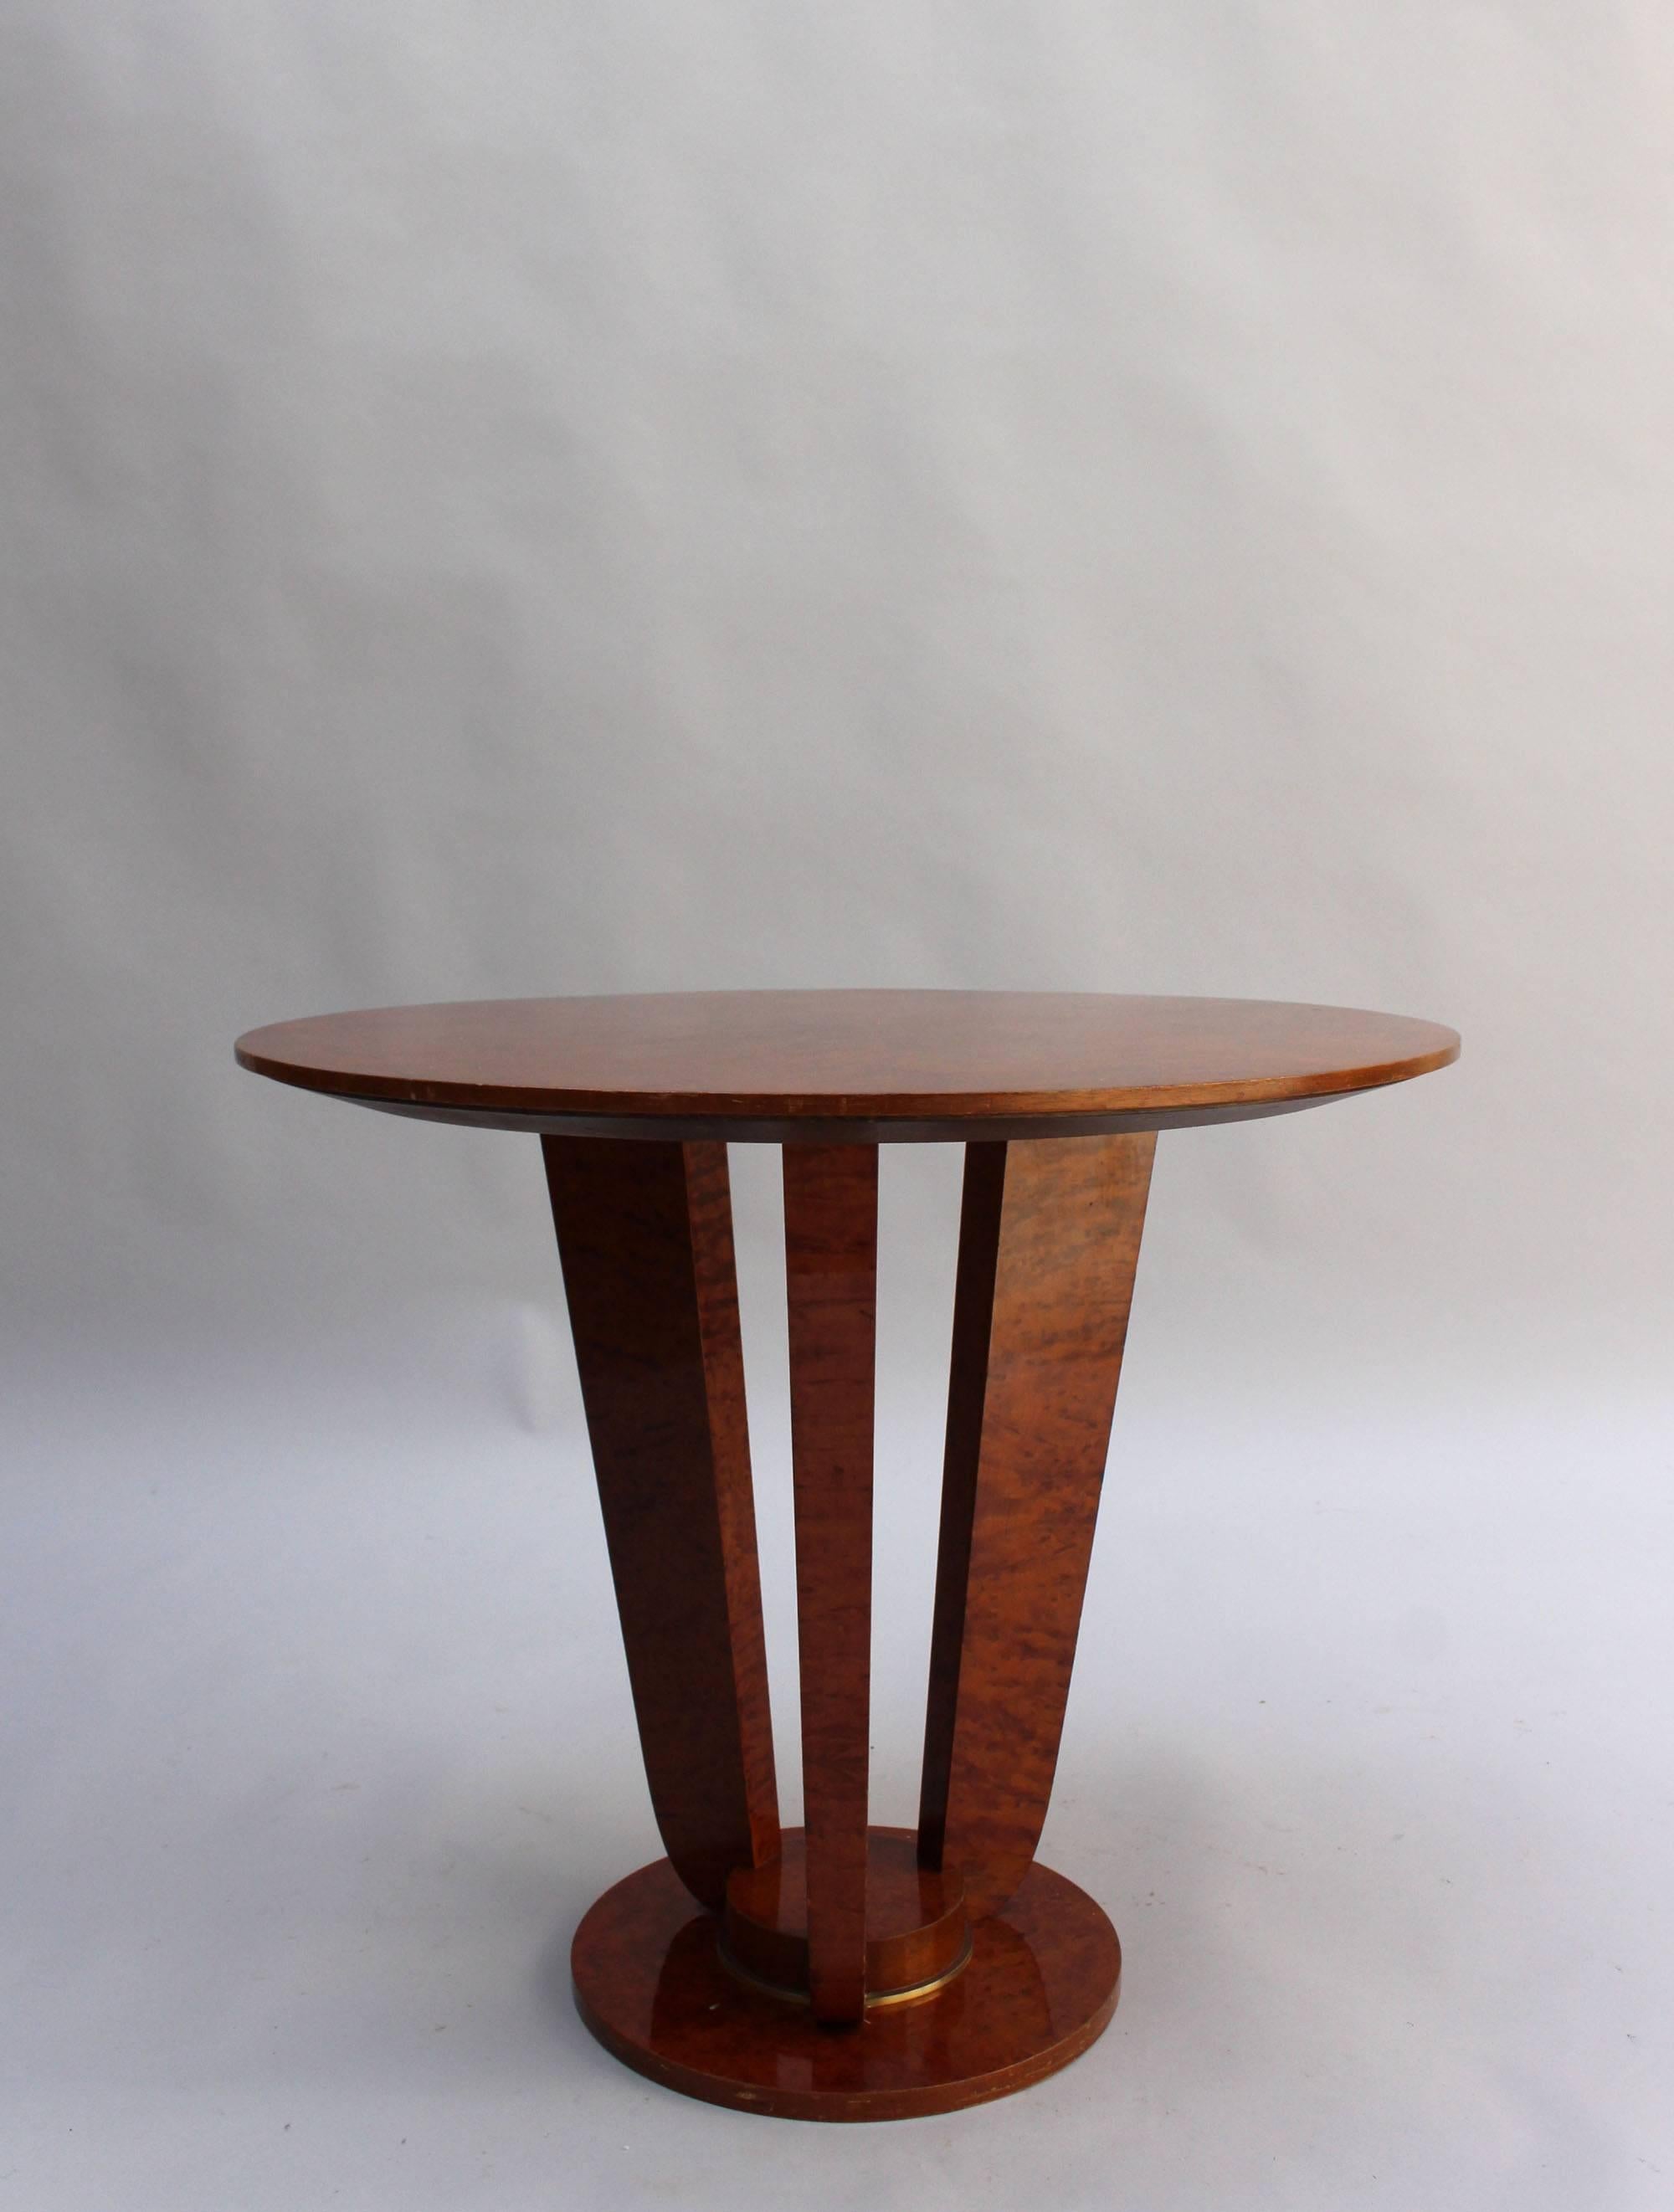 A fine French Art Deco burl elm gueridon - side table with brass detail on a three legs pedestal base.
 